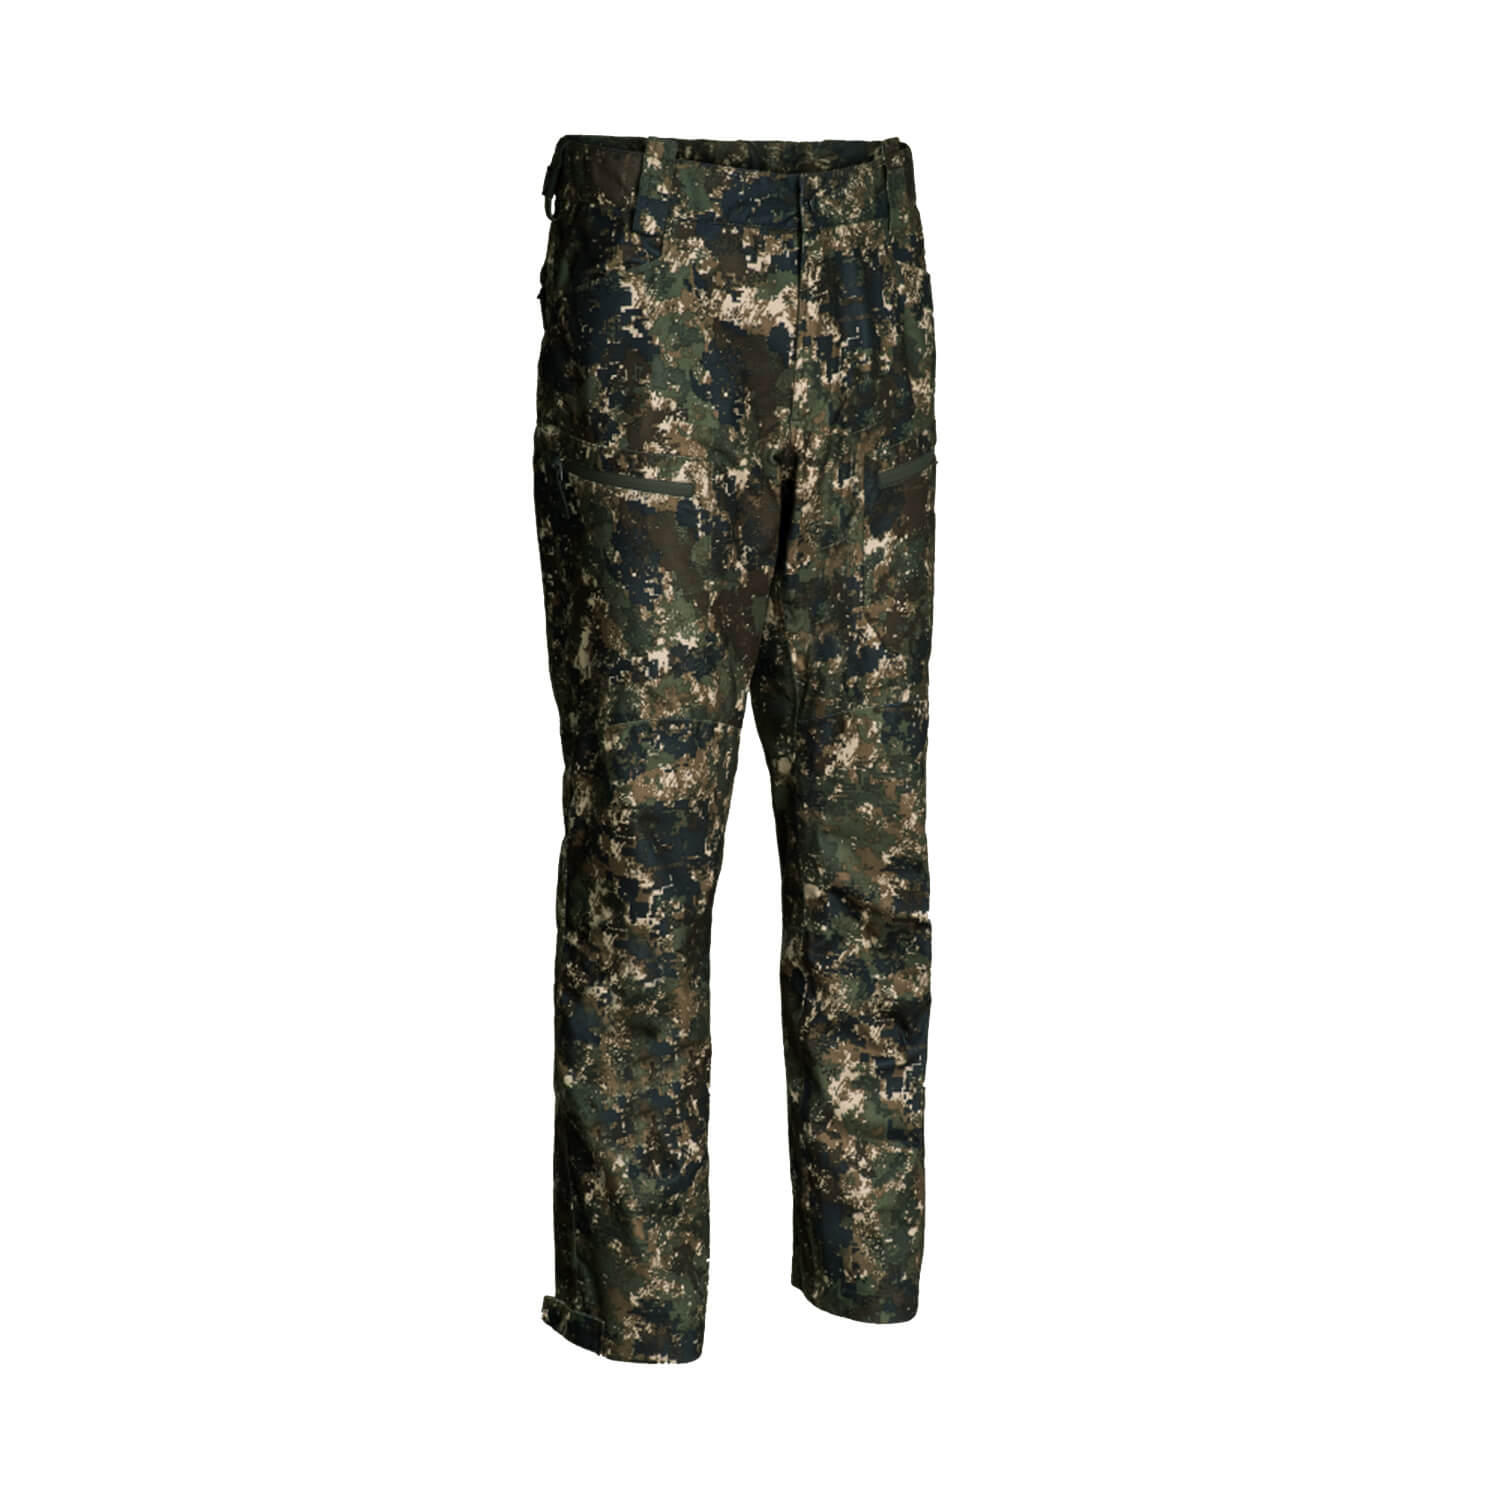 Northern Hunting trousers Skjold Arn G2 OPT2 - Hunting Trousers